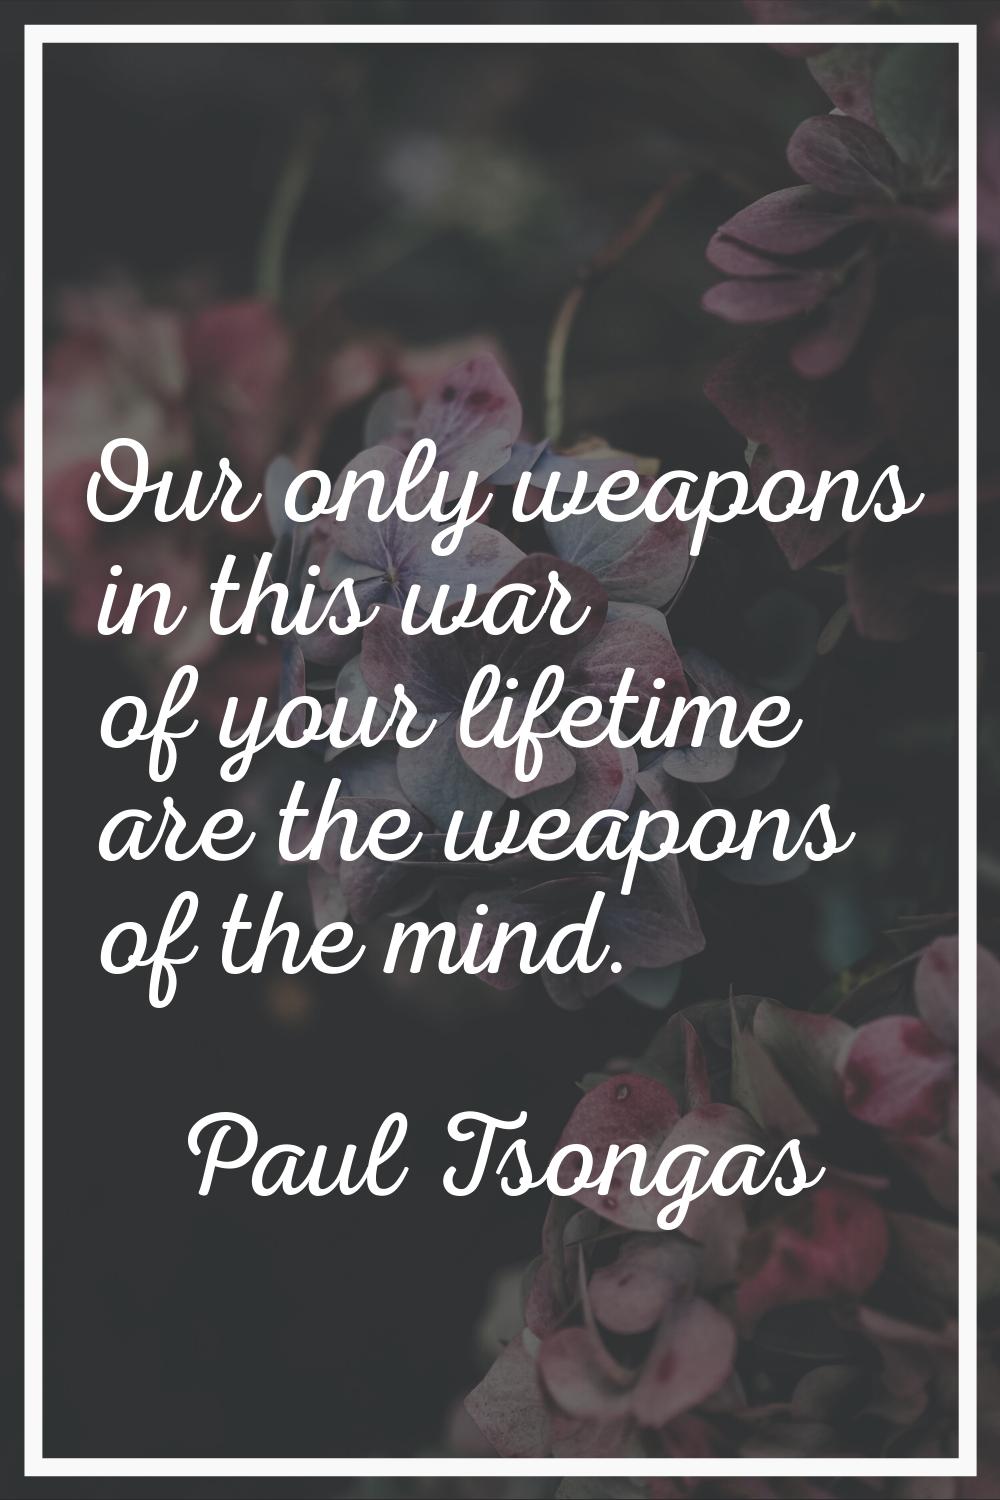 Our only weapons in this war of your lifetime are the weapons of the mind.